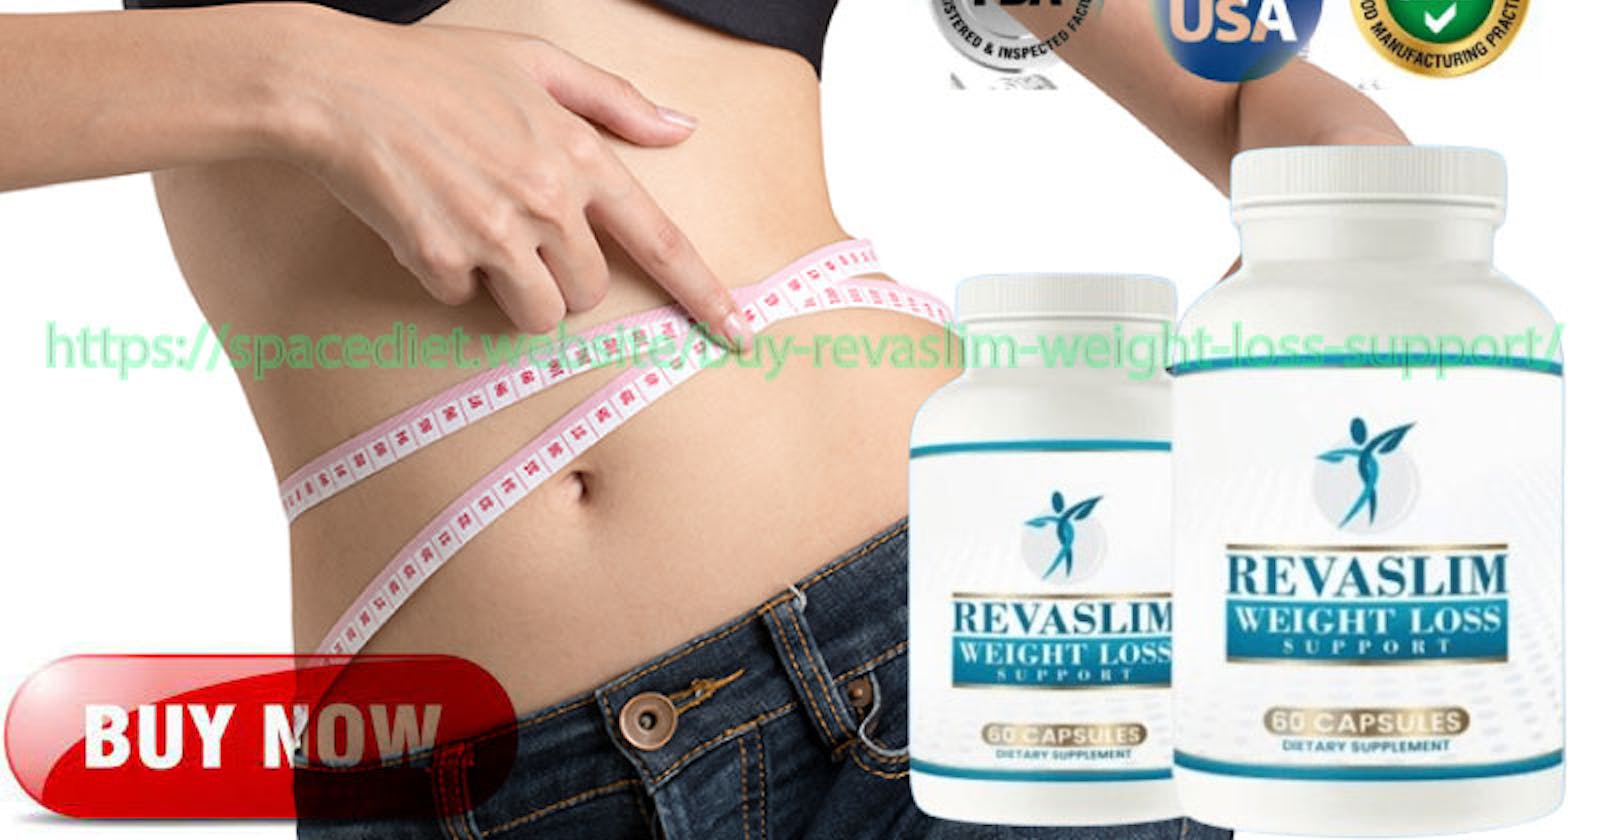 REVASLIM WEIGHT LOSS SUPPORT - Does It Work or Scam? What They Won’t Say Before Buy!